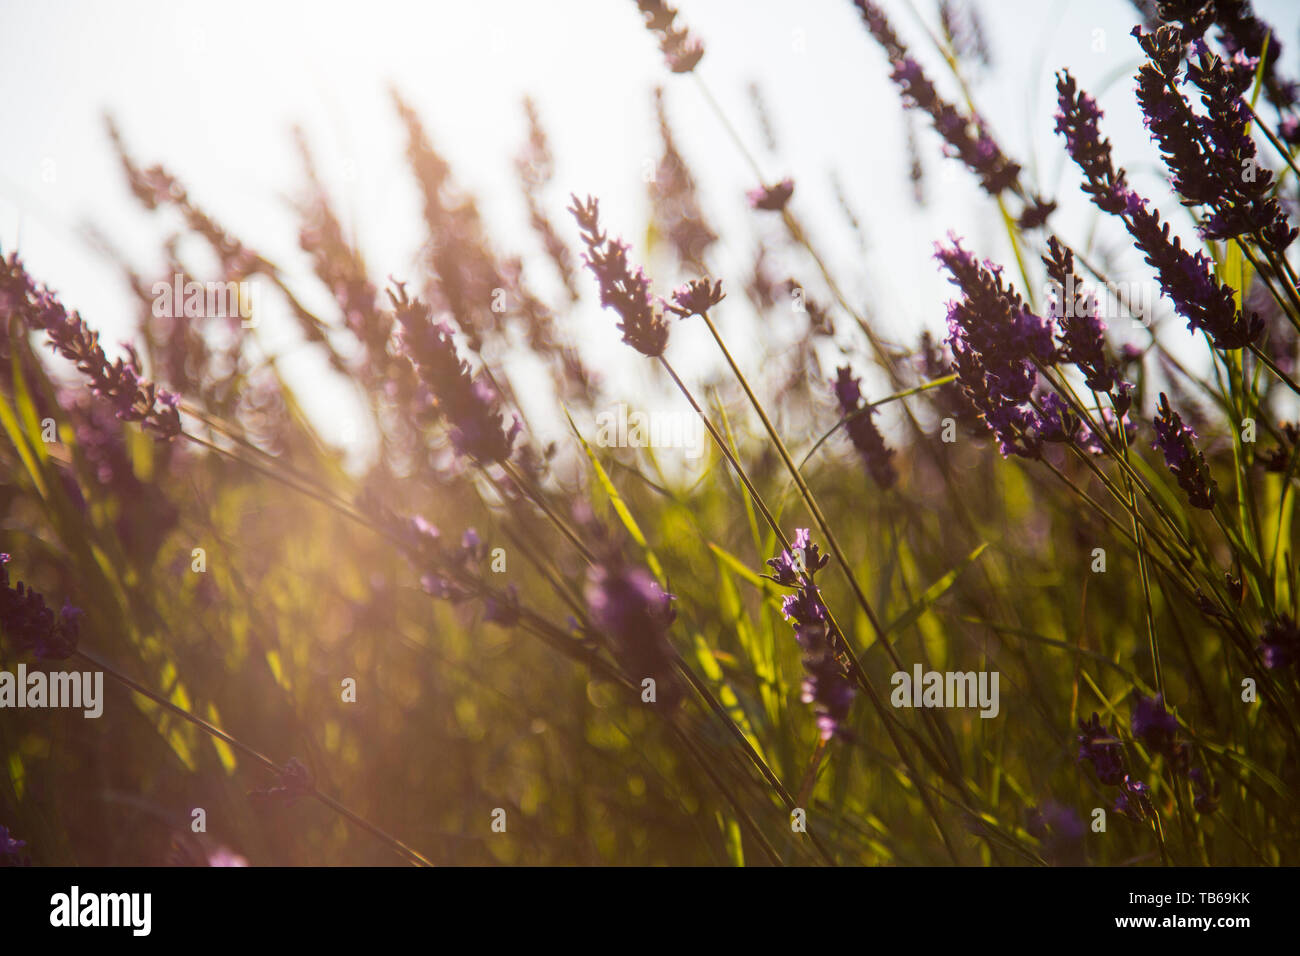 Warm sunlight shines through field of lavender in Provence, France. Stock Photo